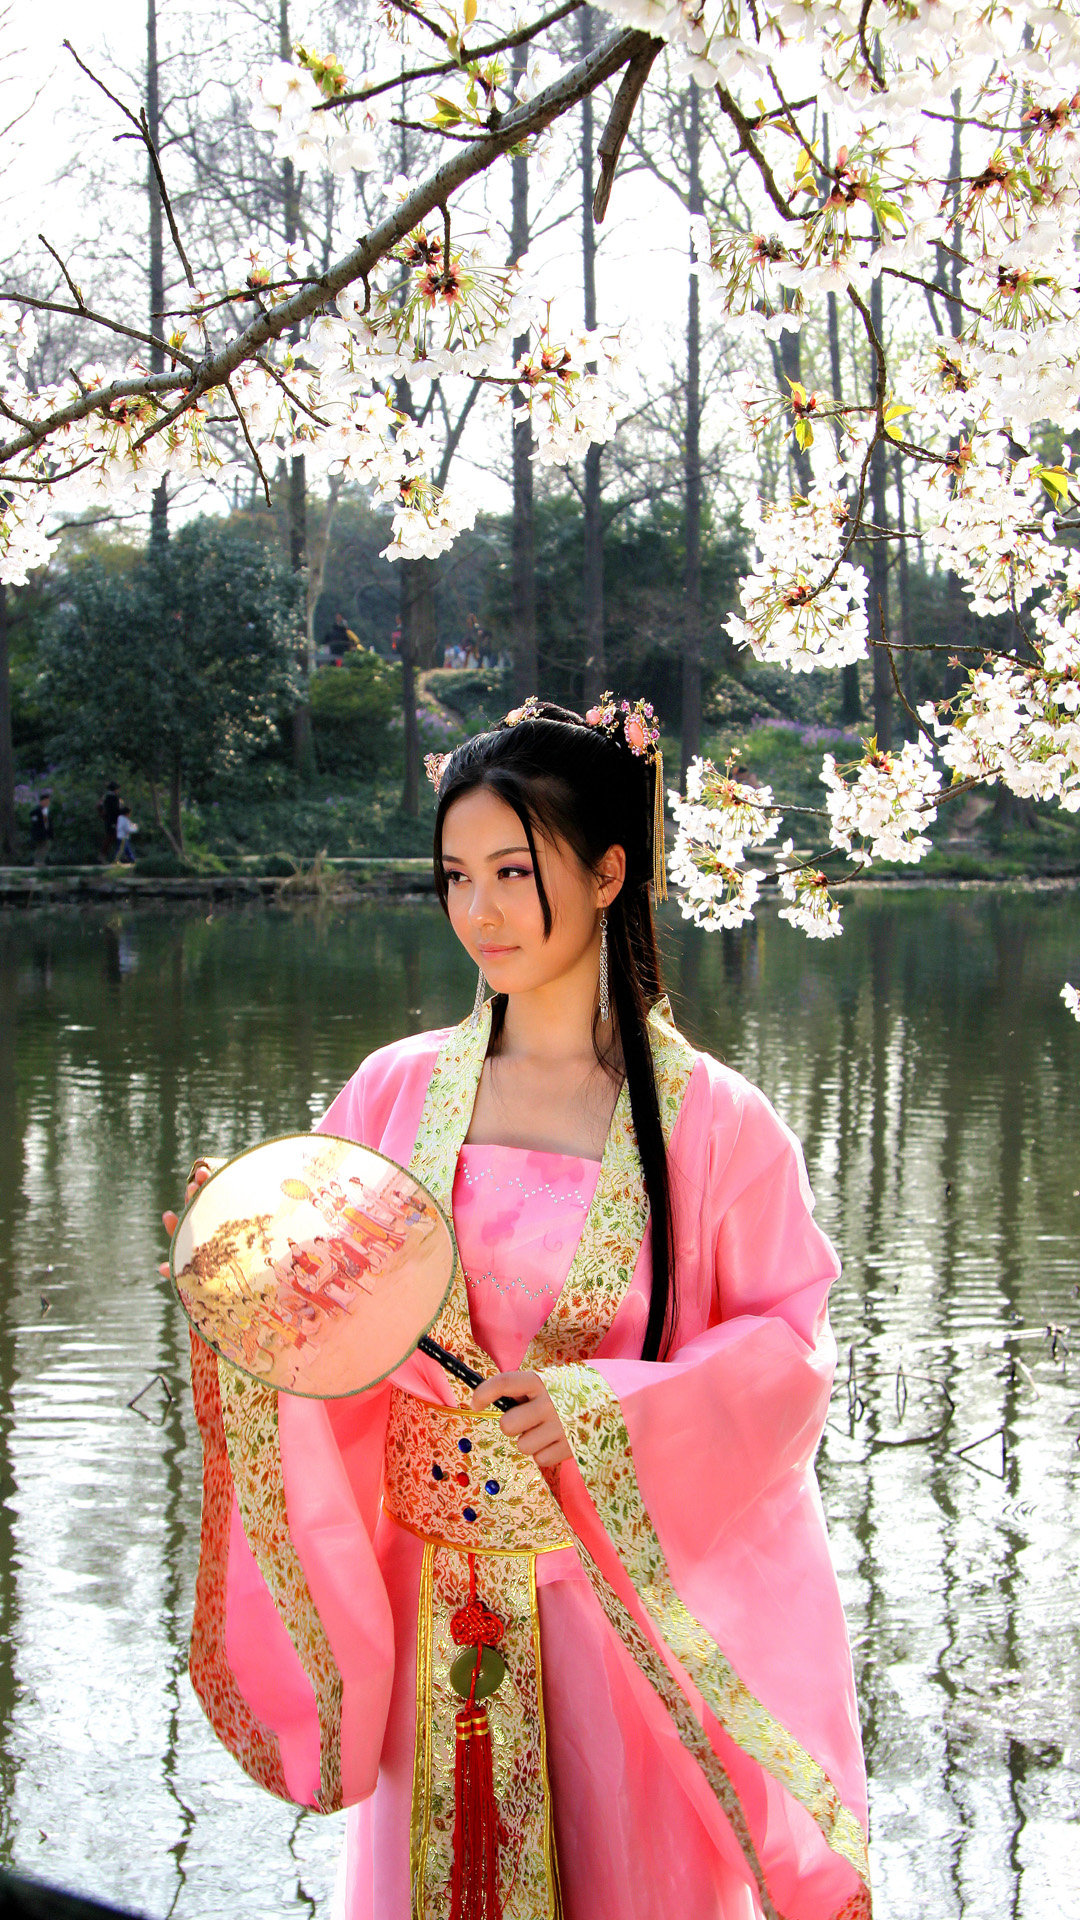 Classical Chinese girl